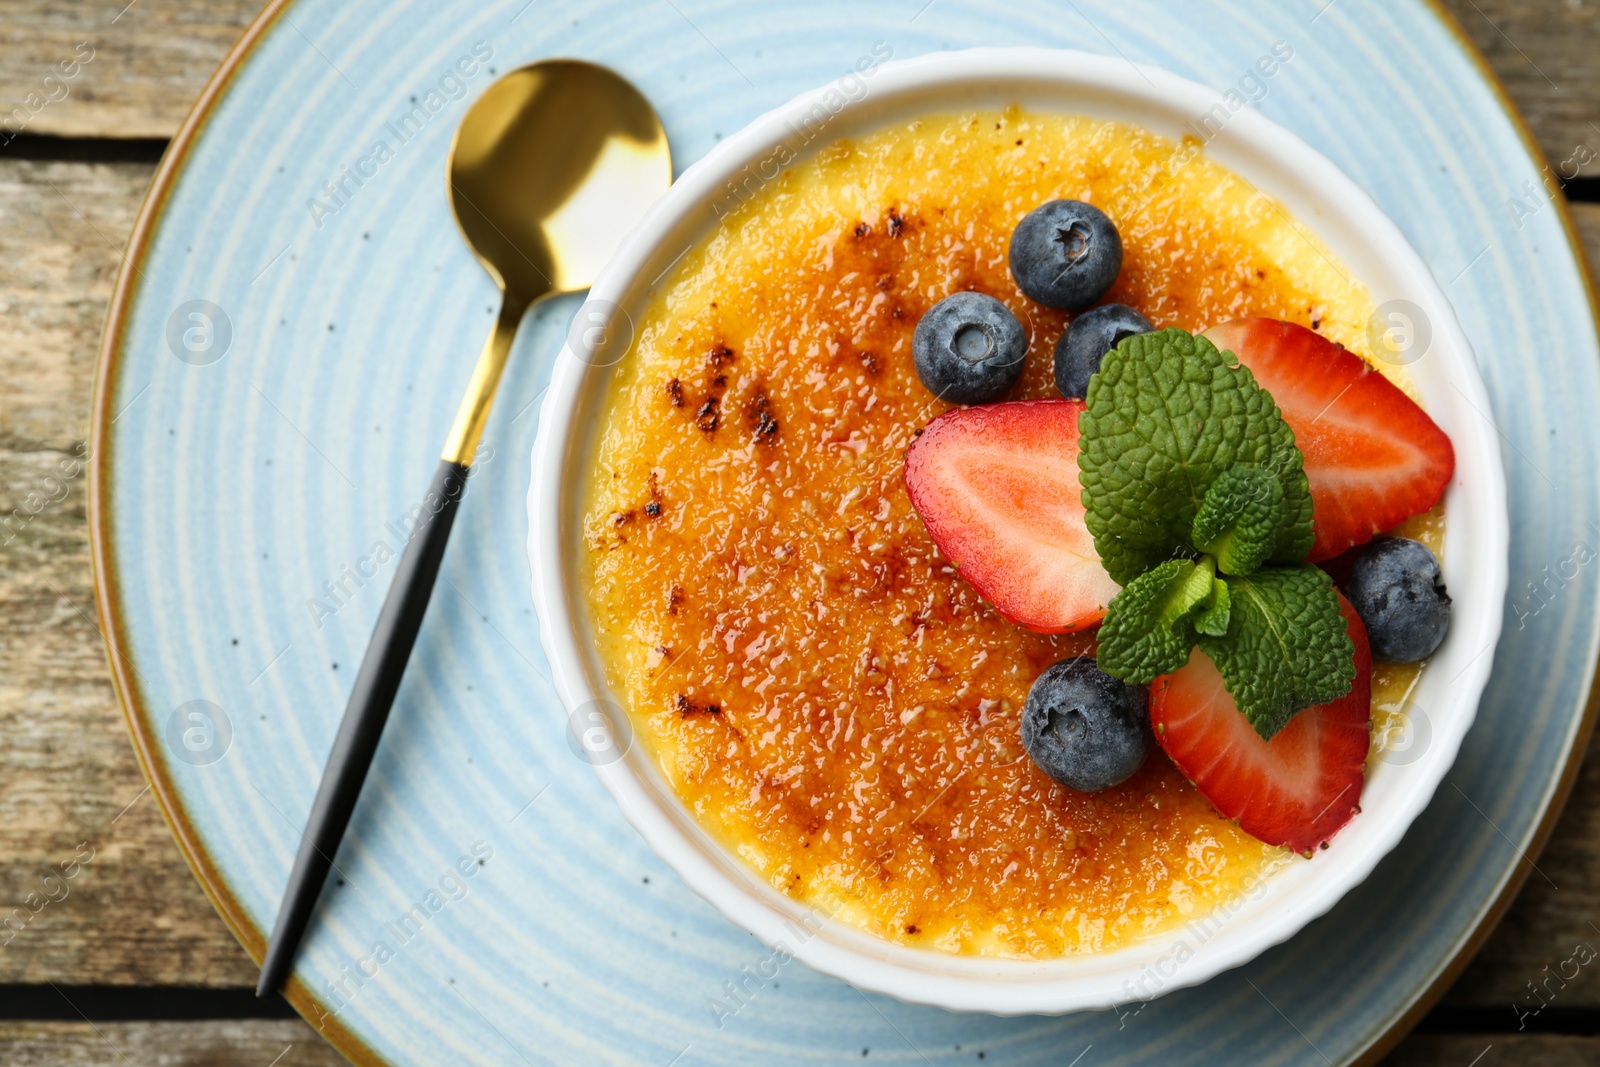 Photo of Delicious creme brulee with berries and mint in bowl on wooden table, top view